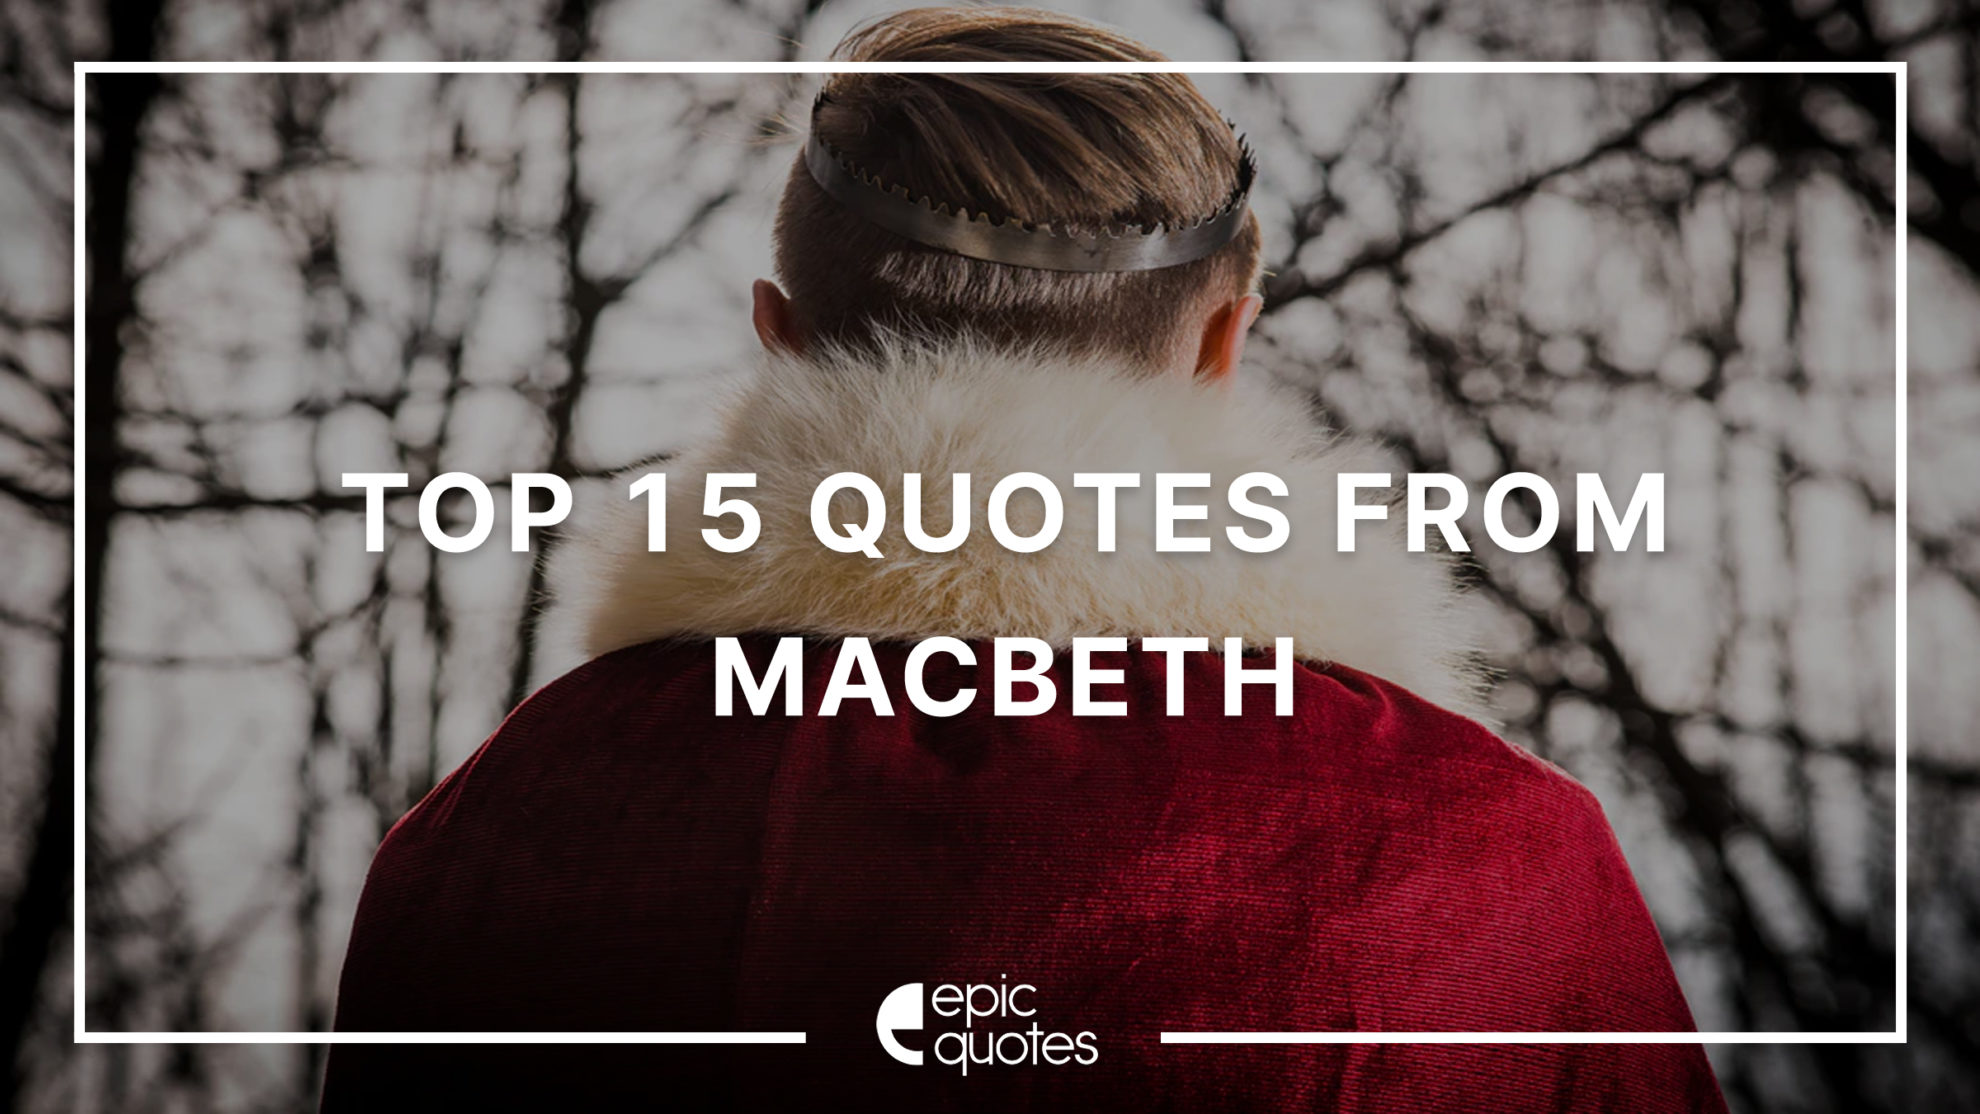 lady macbeth character traits and quotes